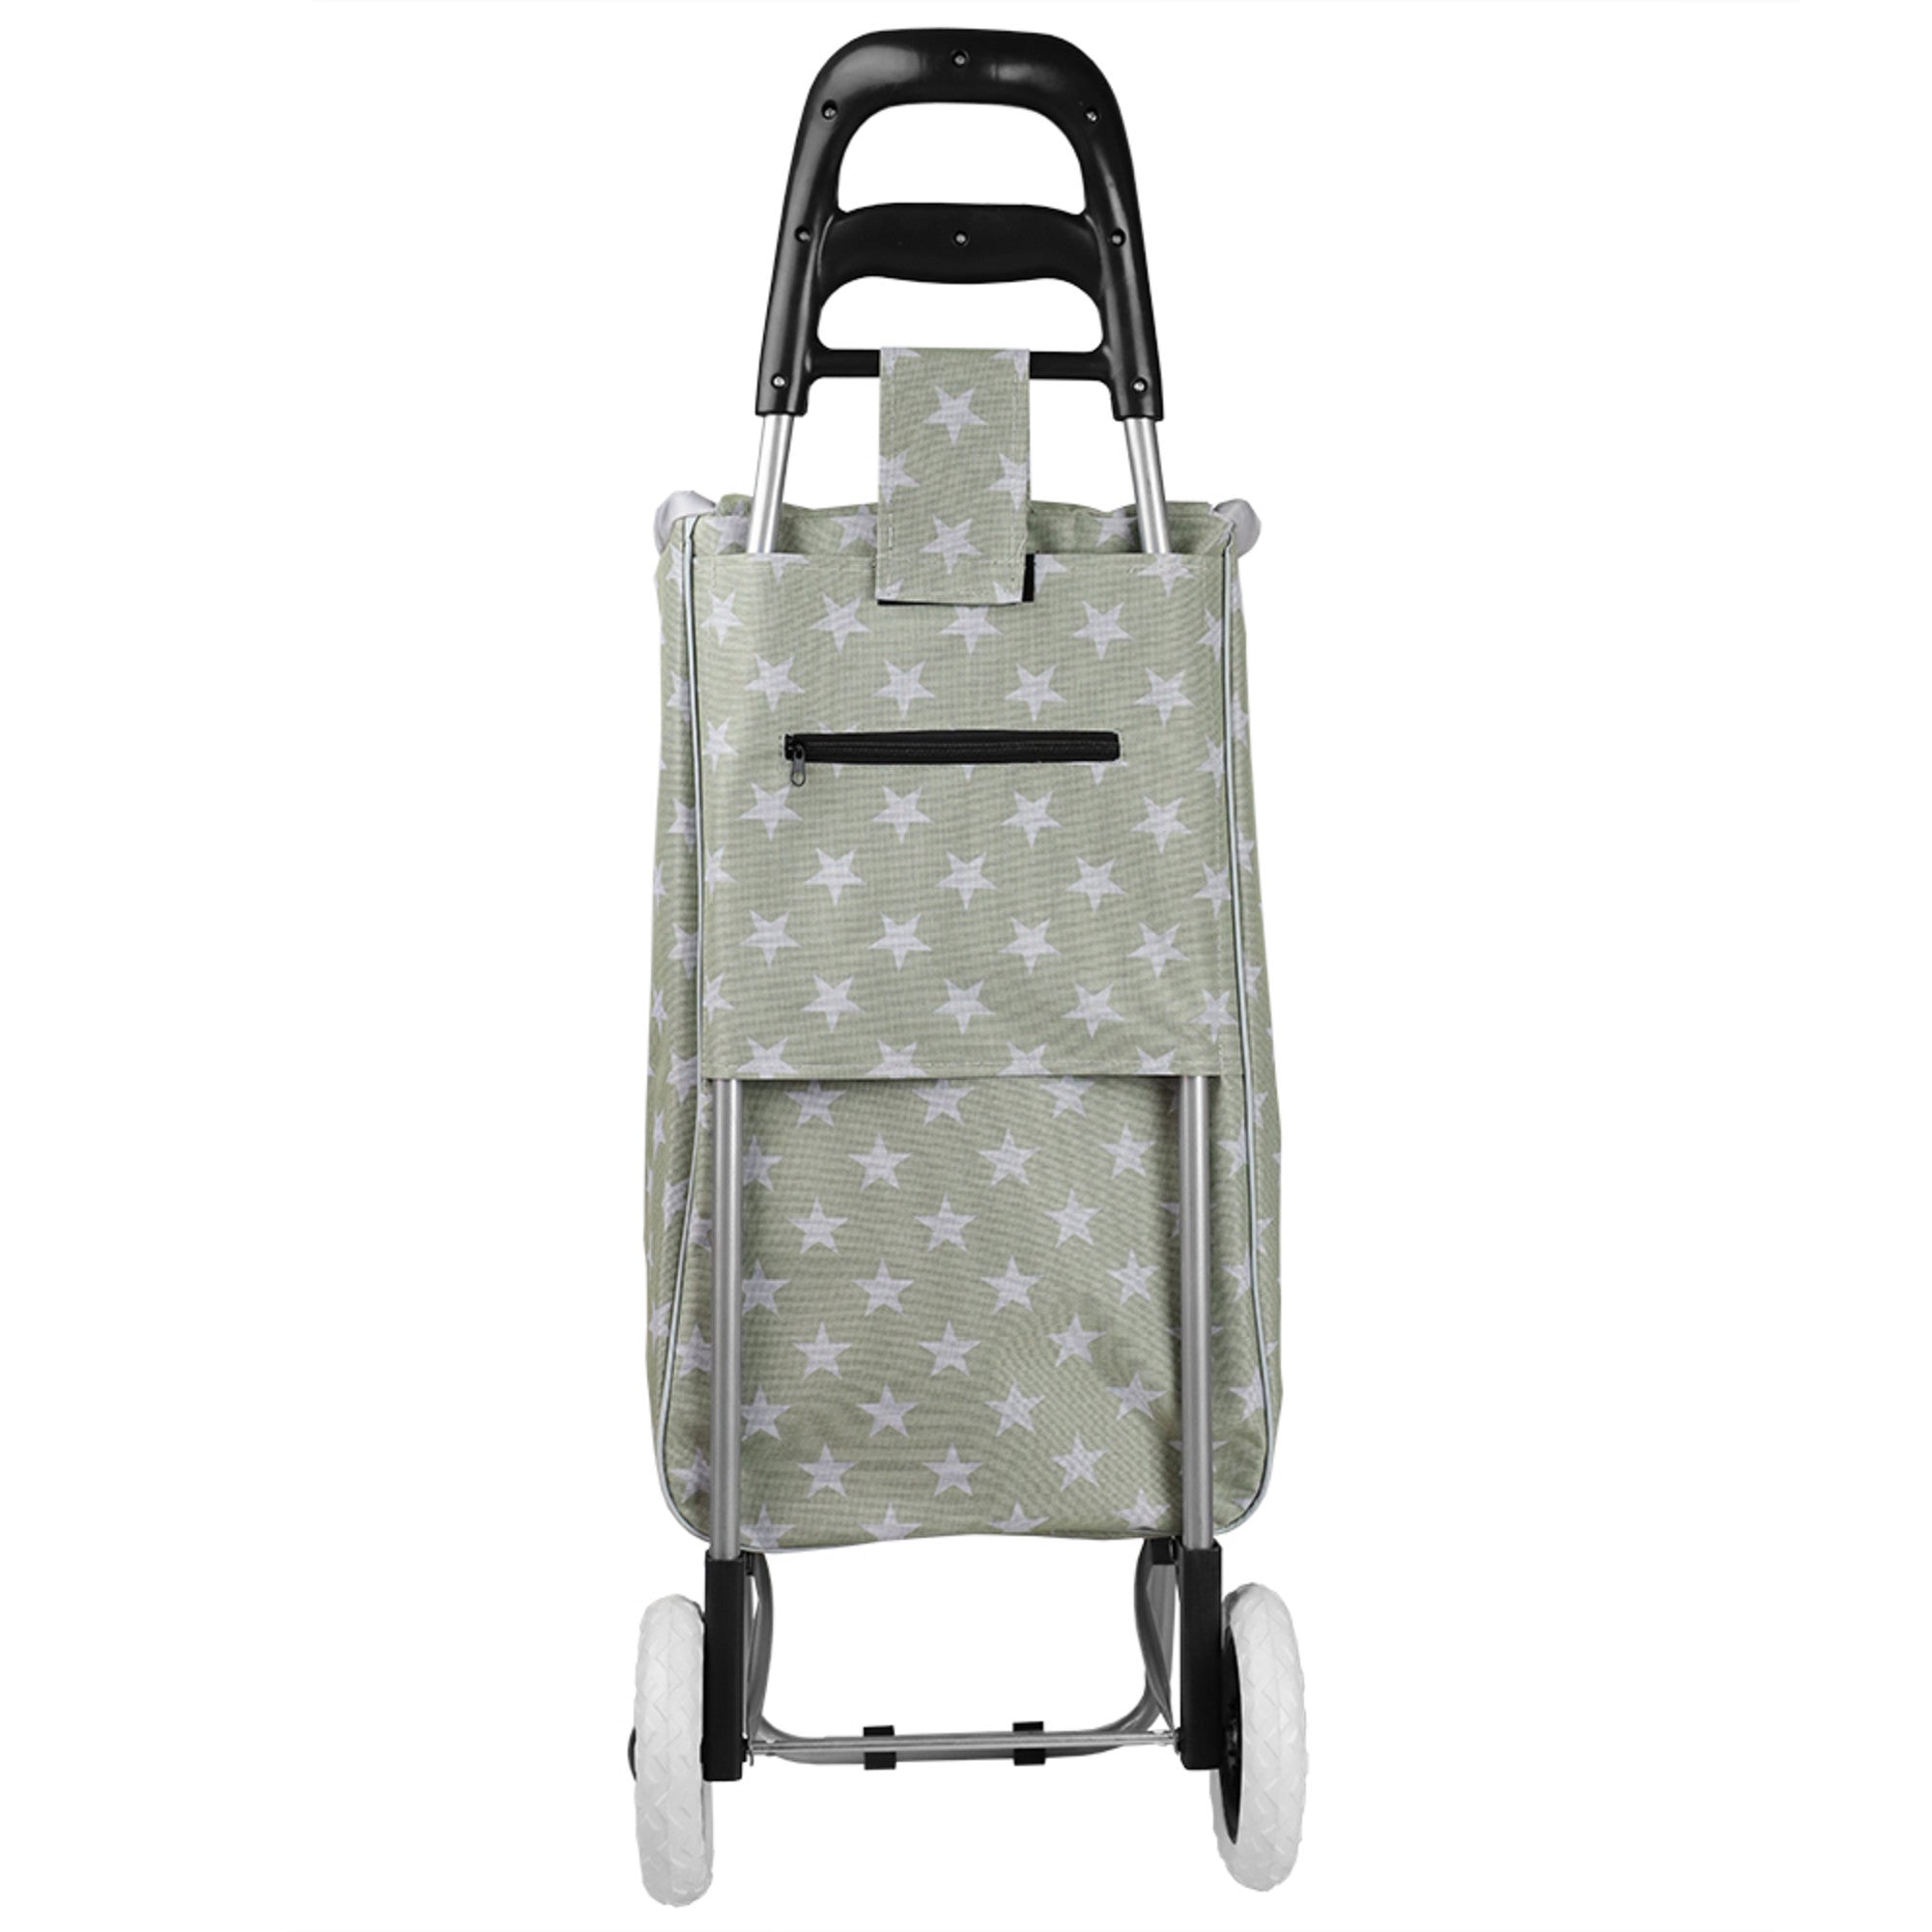 Home Basics Stars Rolling Shopping Cart - Assorted Colors